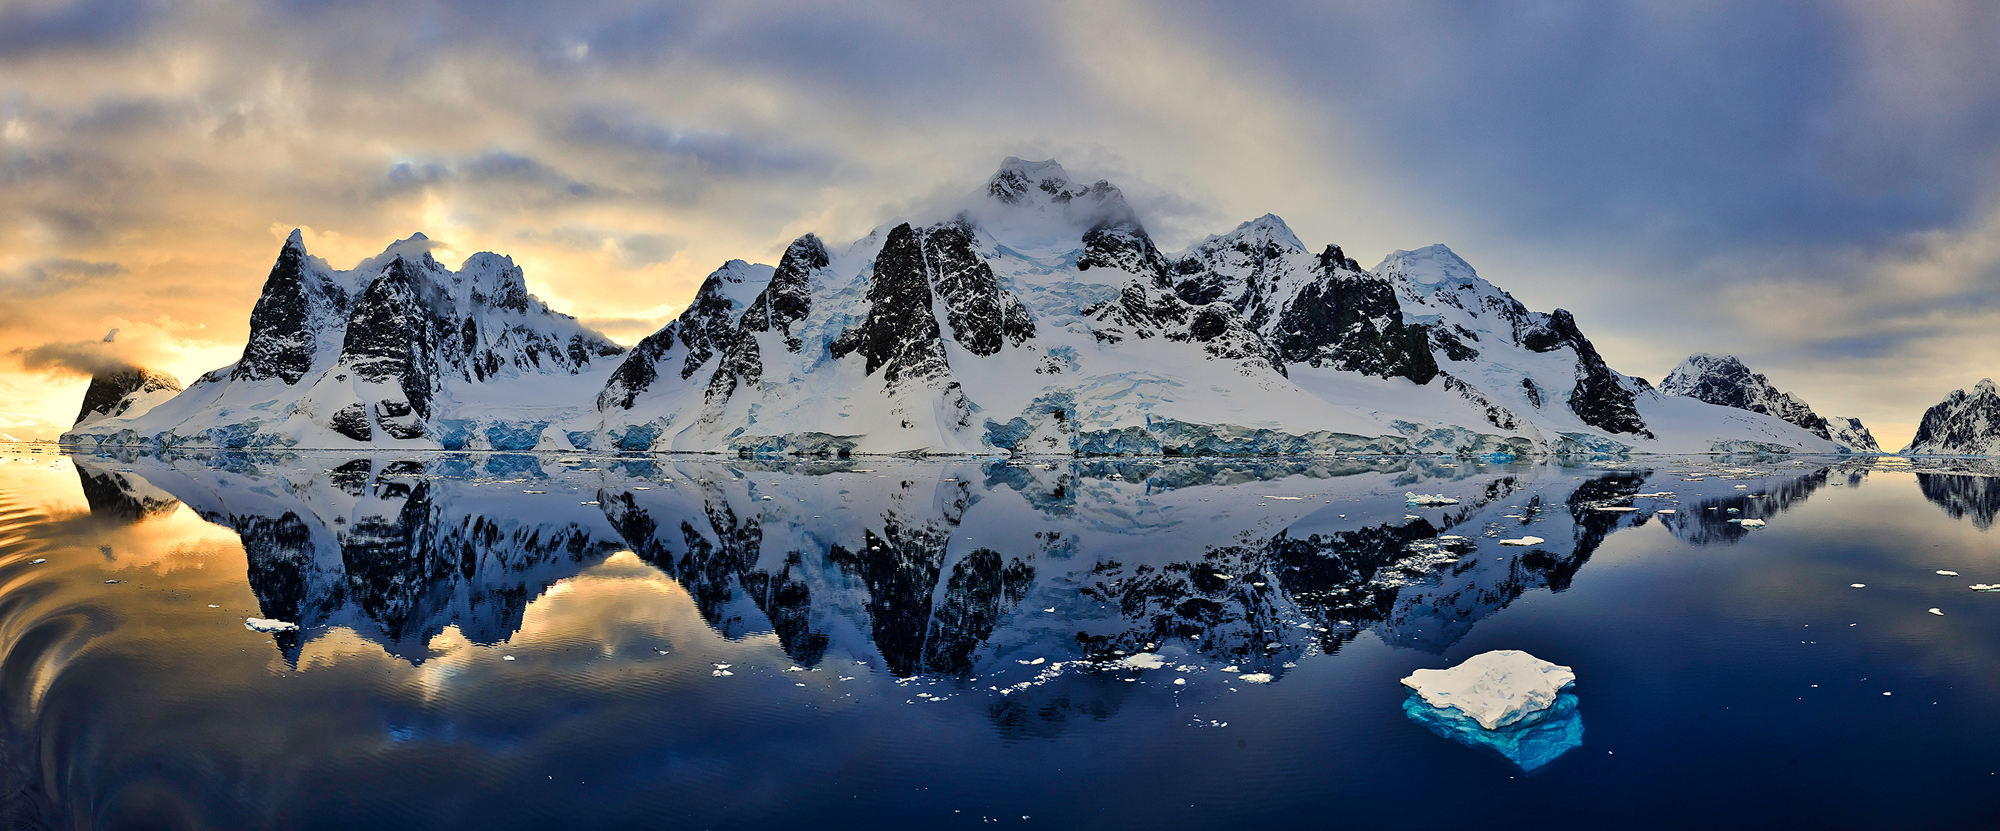 28 Image stitch from a moving ship in Lemaire Channel, Antarctica. You can see both ends of the channel. I'm pretty proud of this one.